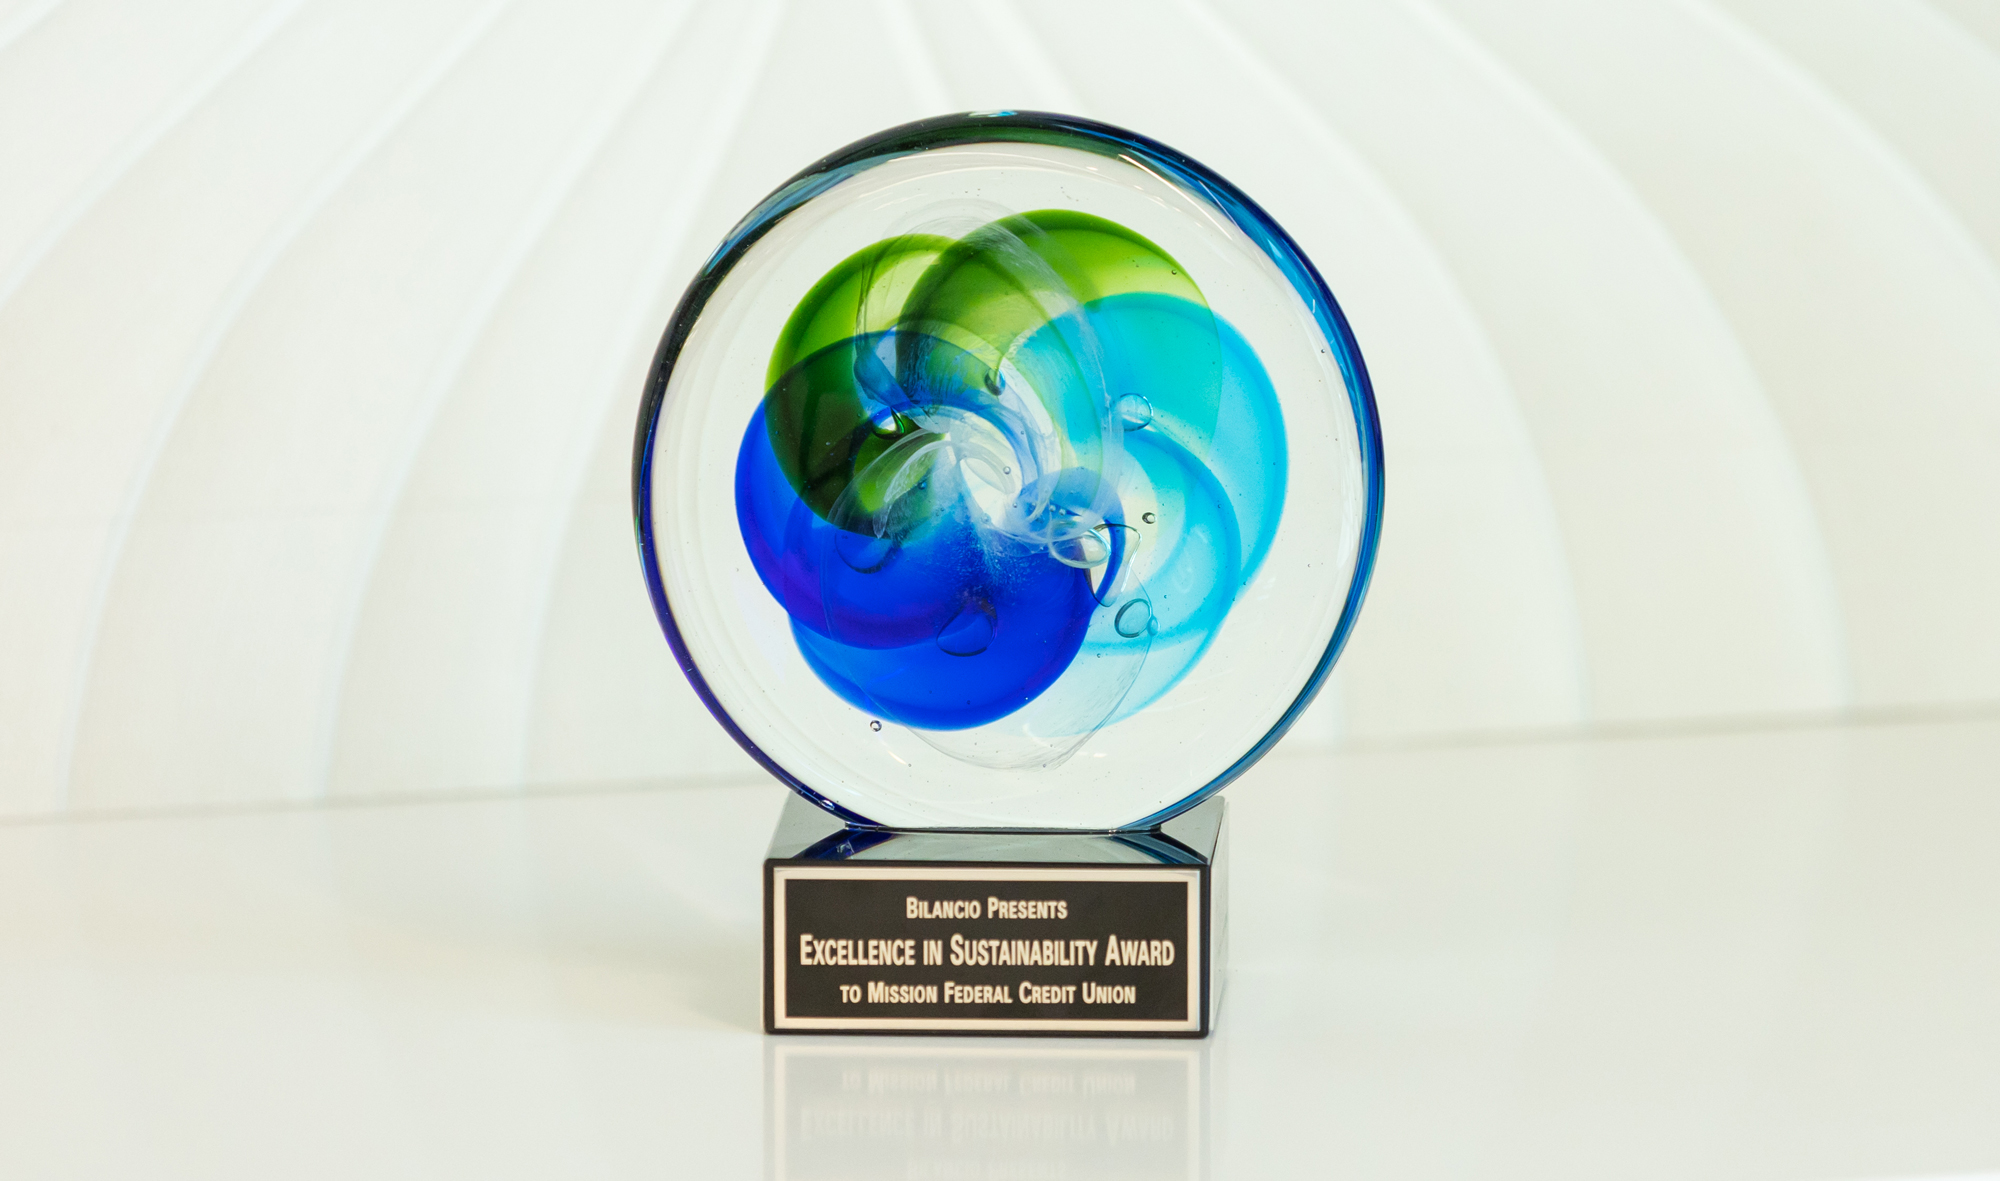 Mission Federal Credit Union Excellence in Sustainability Award